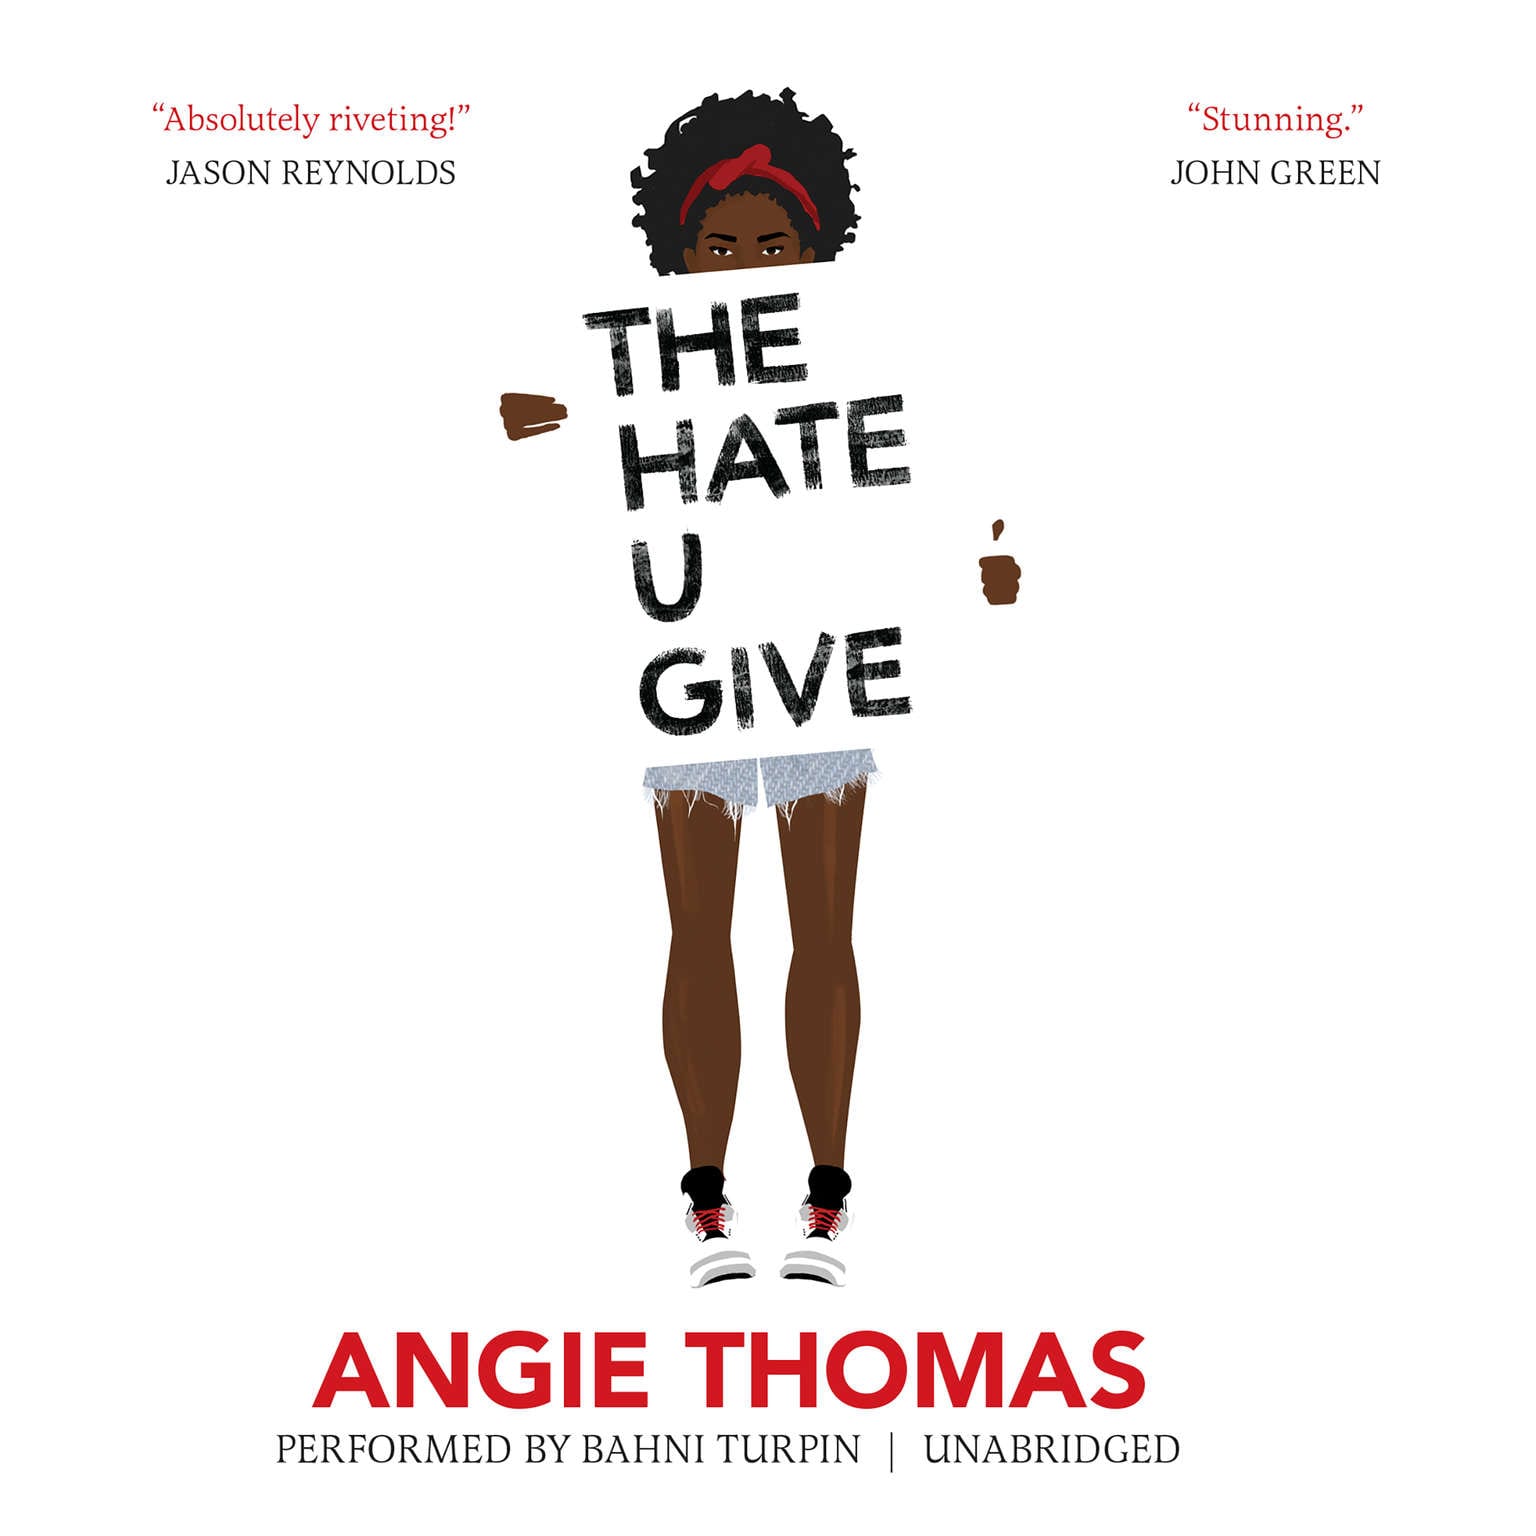 essay about the book the hate you give